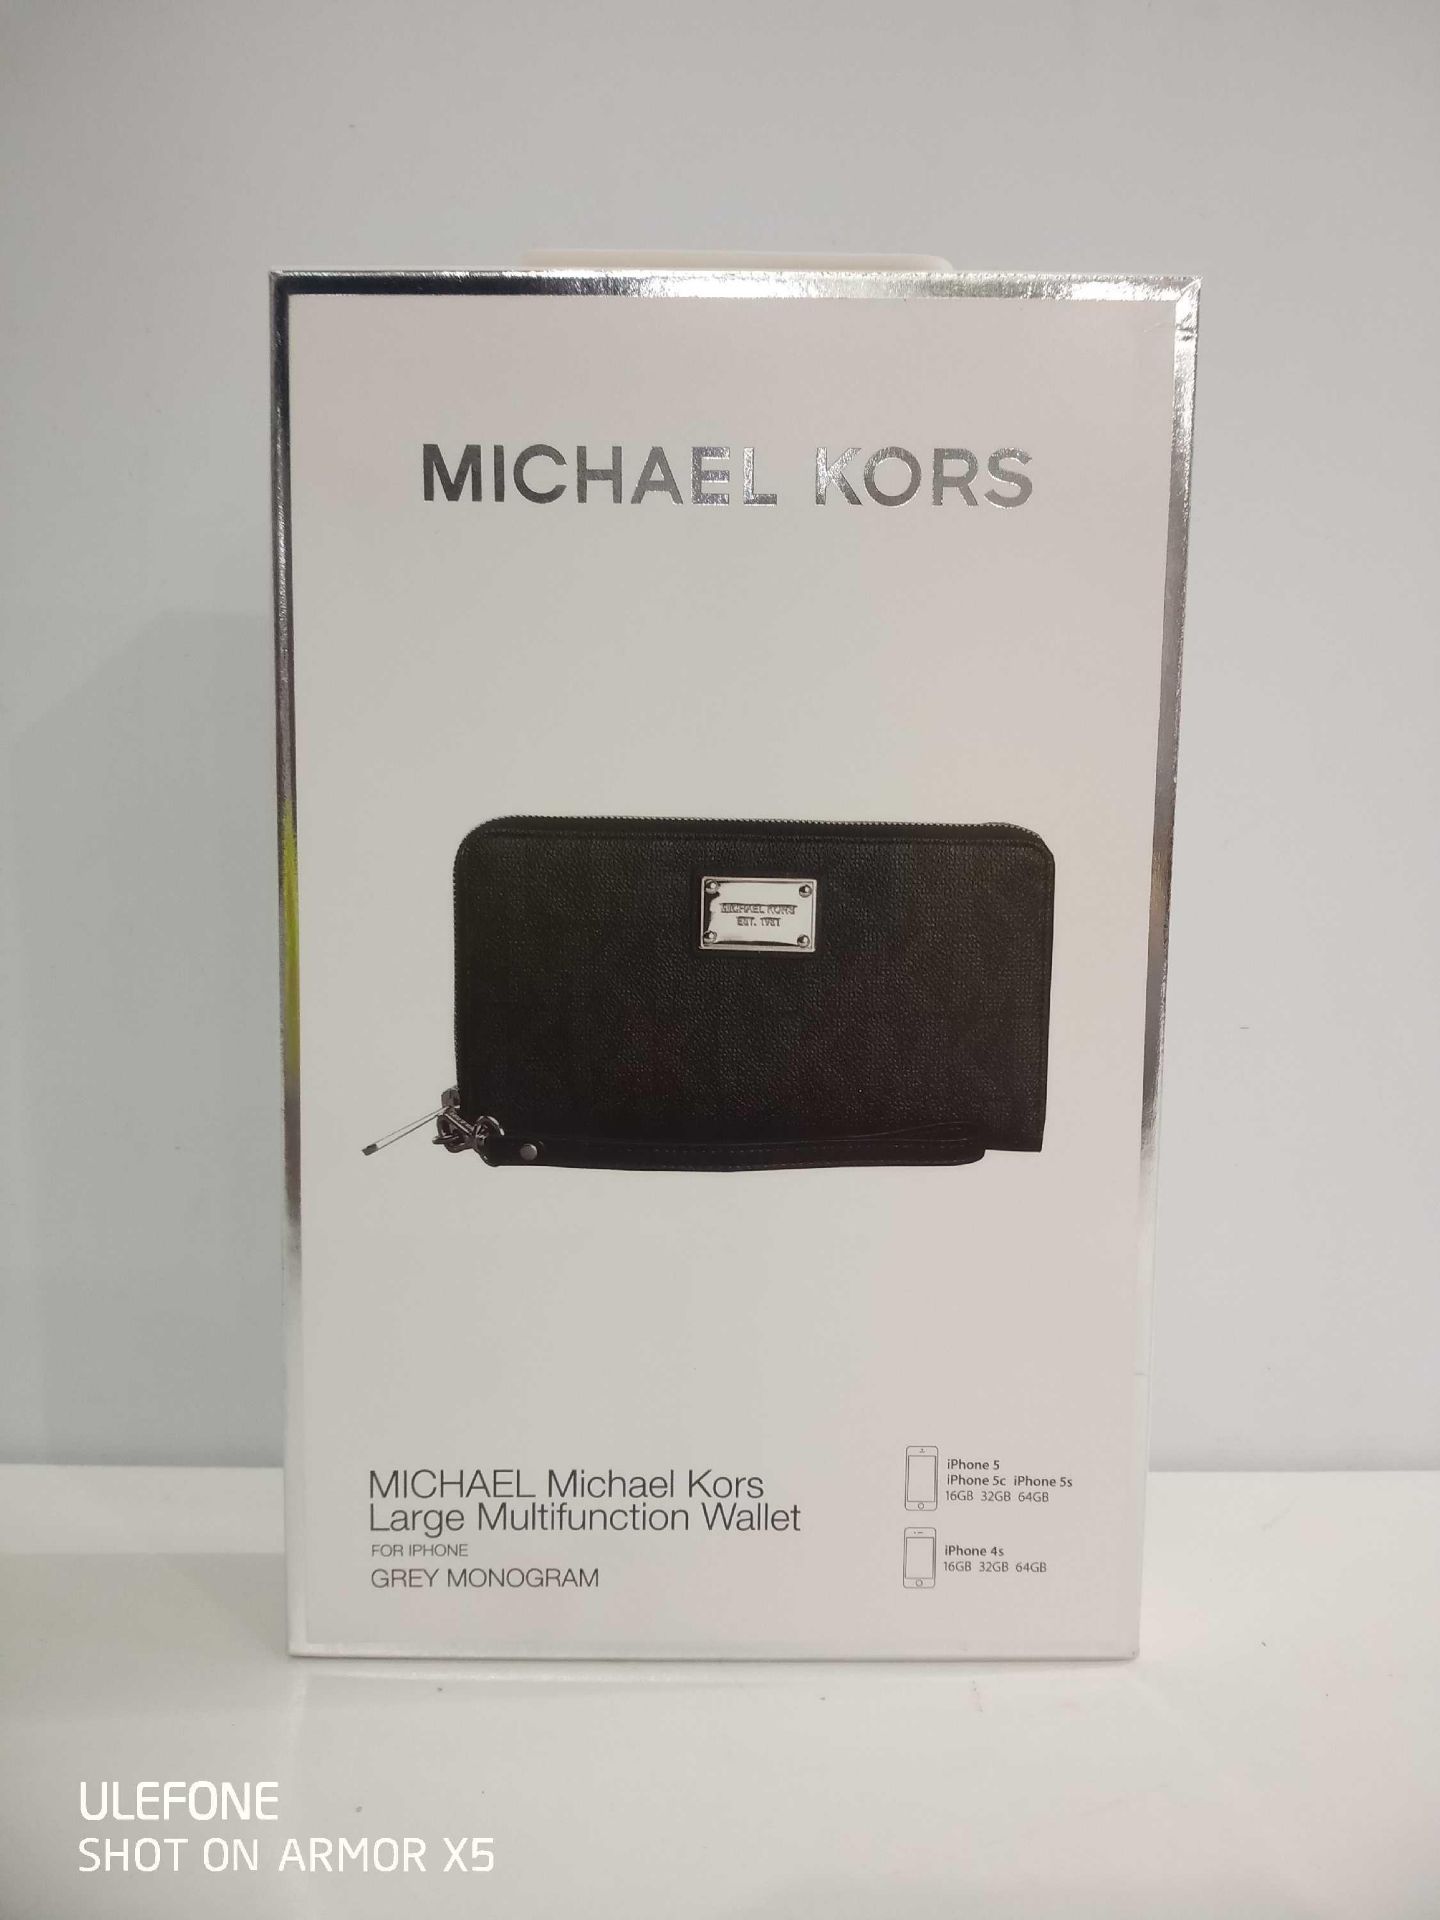 RRP £100 Boxed Michael Kors Grey Monogram Large Multifunction Purse Or Wallet For Iphone 5 - Image 5 of 6